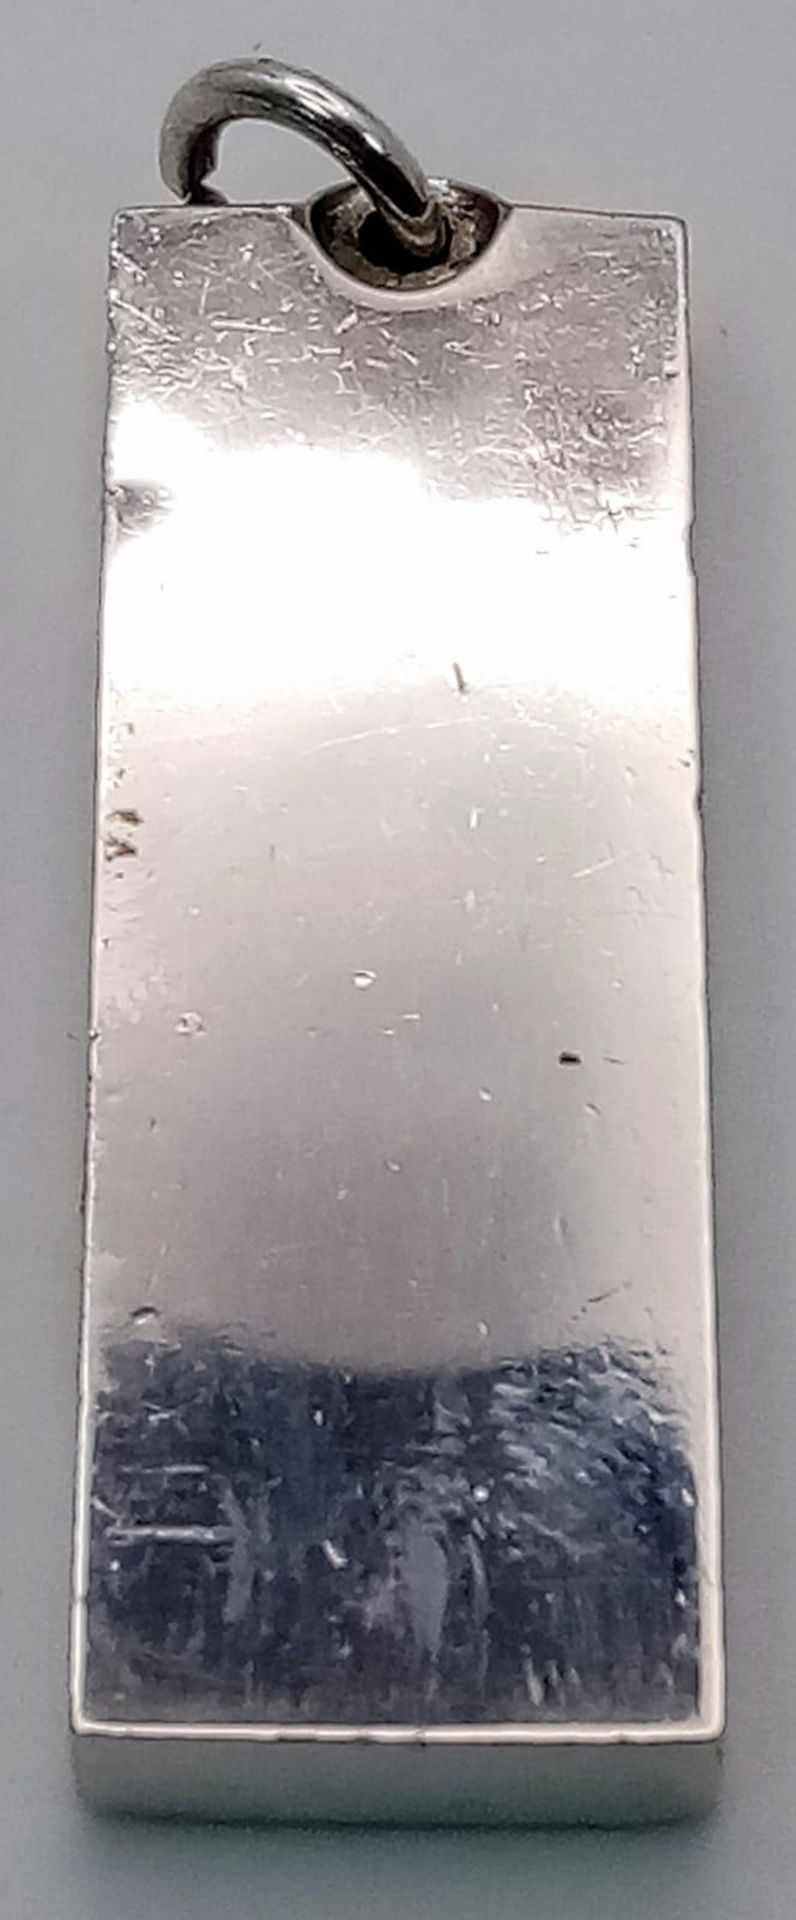 STERLING SILVER INGOT PENDANT, FULLY HALLMARKED FRONT, WEIGHT 30.4G - Image 2 of 6